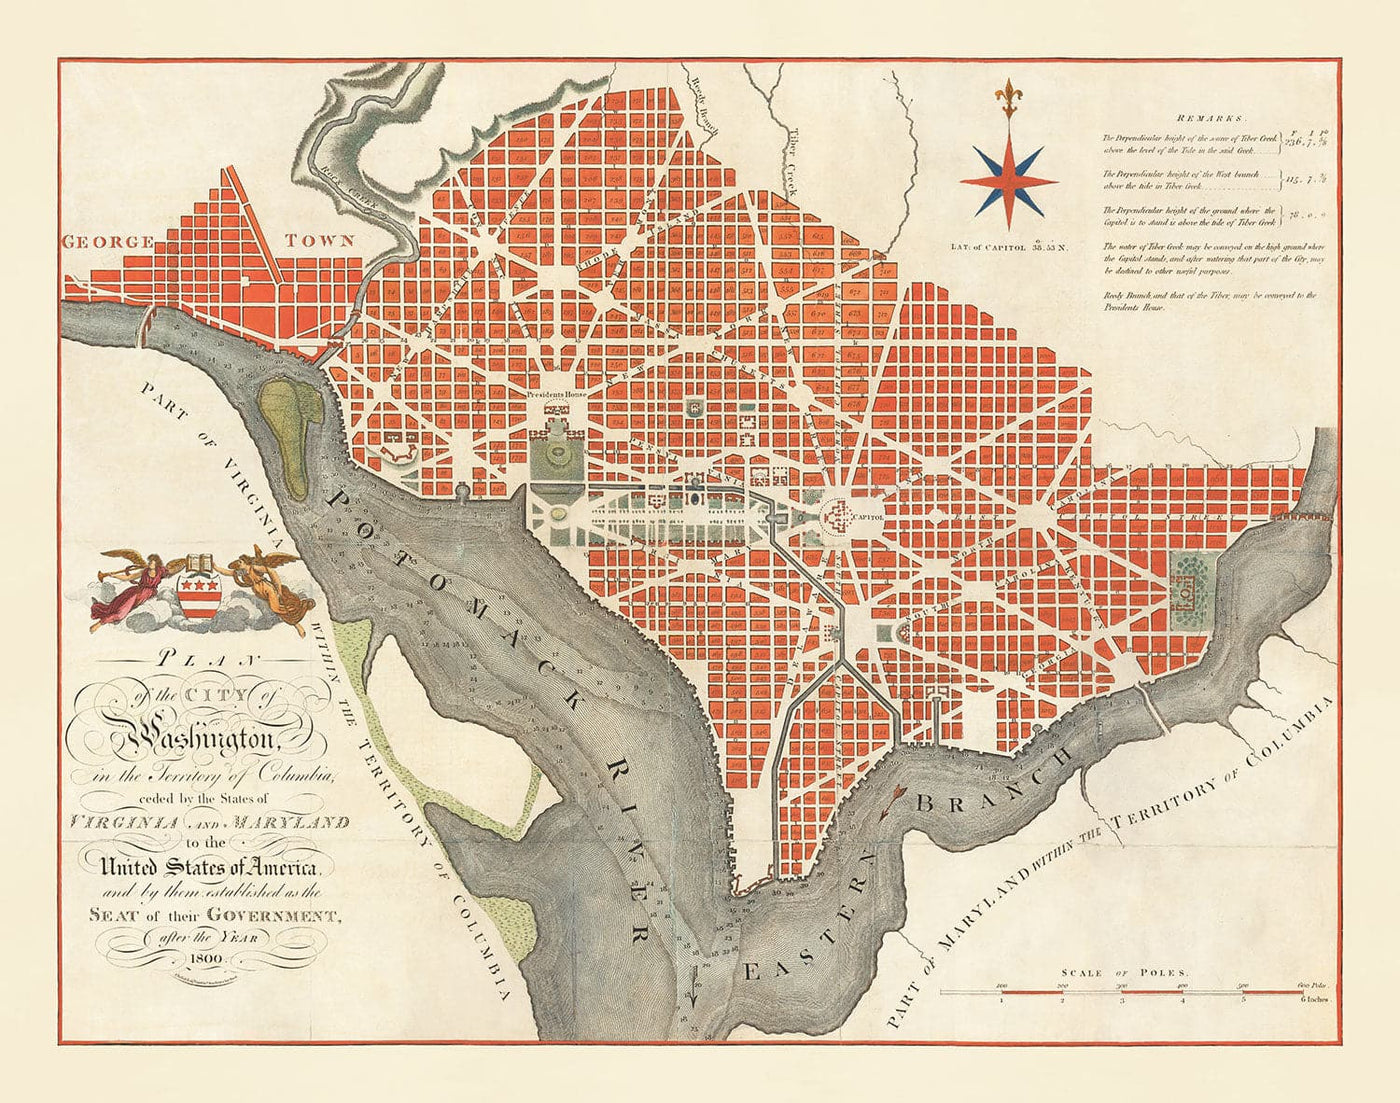 Very Old Map of Washington DC, 1795 by John Russell - Georgetown, White House, Capitol, White House, City Plan